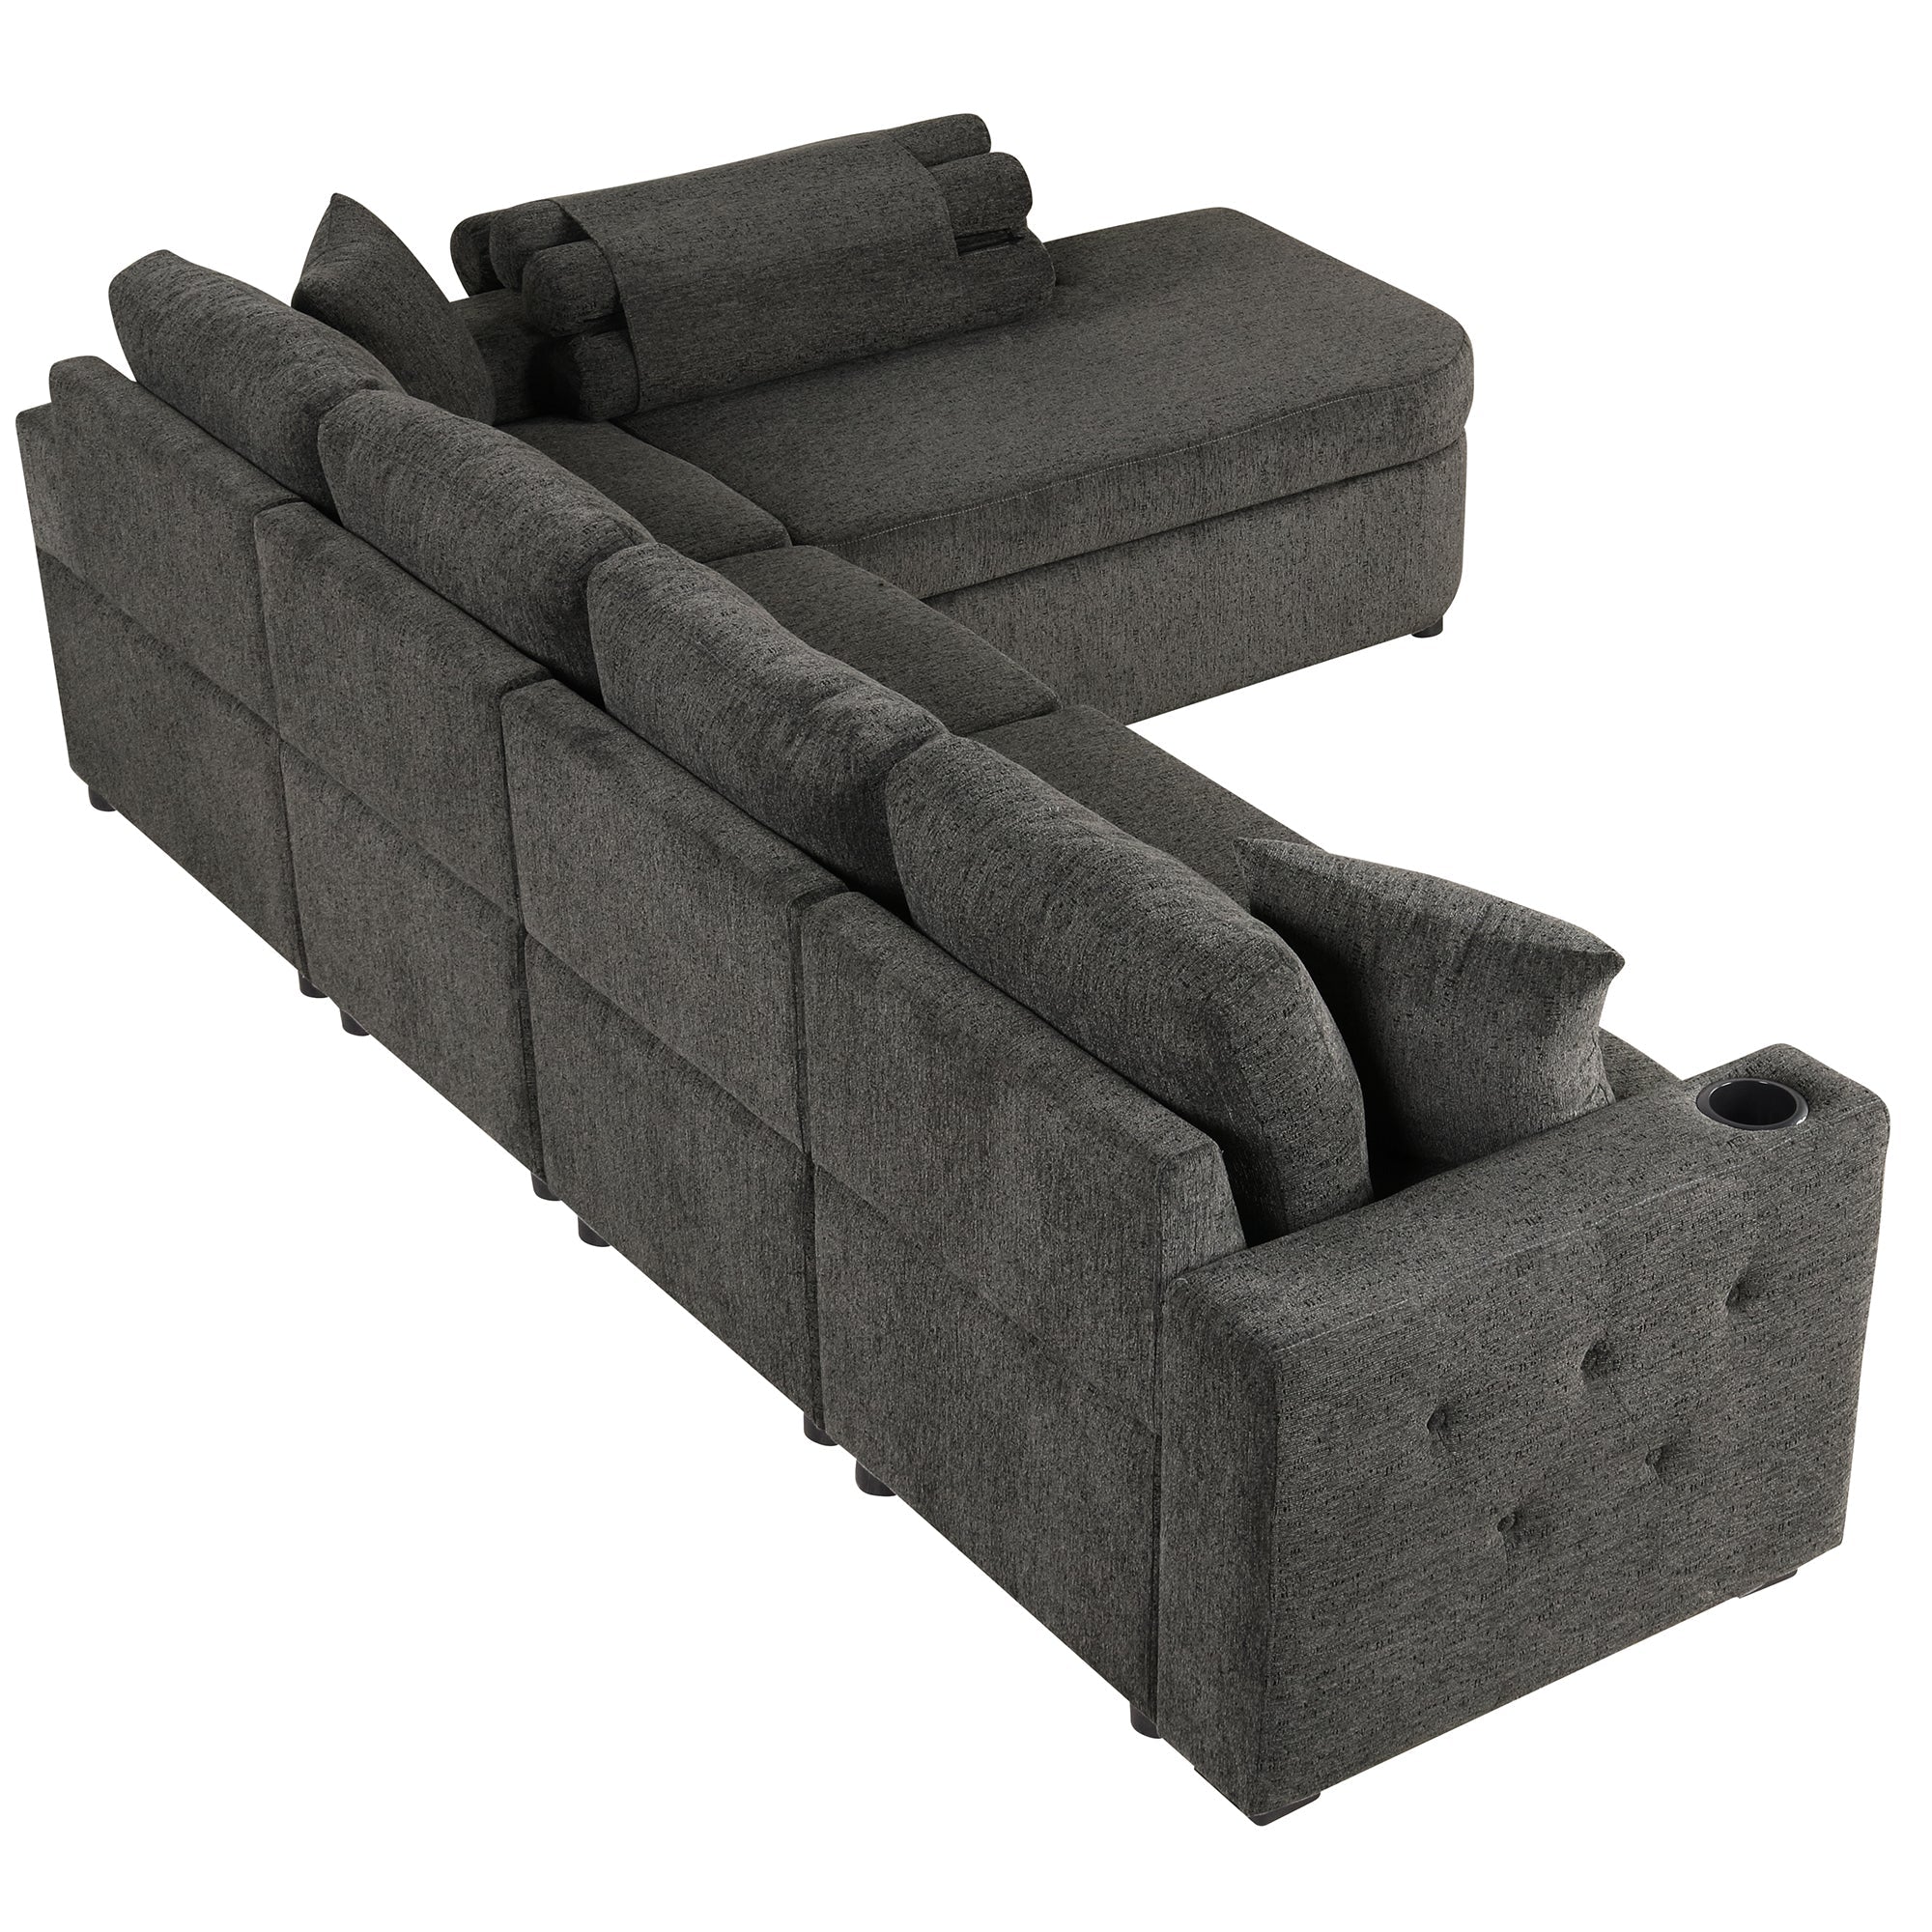 L-Shaped Sectional Sofa with Storage Chaise, Cup Holder, USB - Black-Stationary Sectionals-American Furniture Outlet